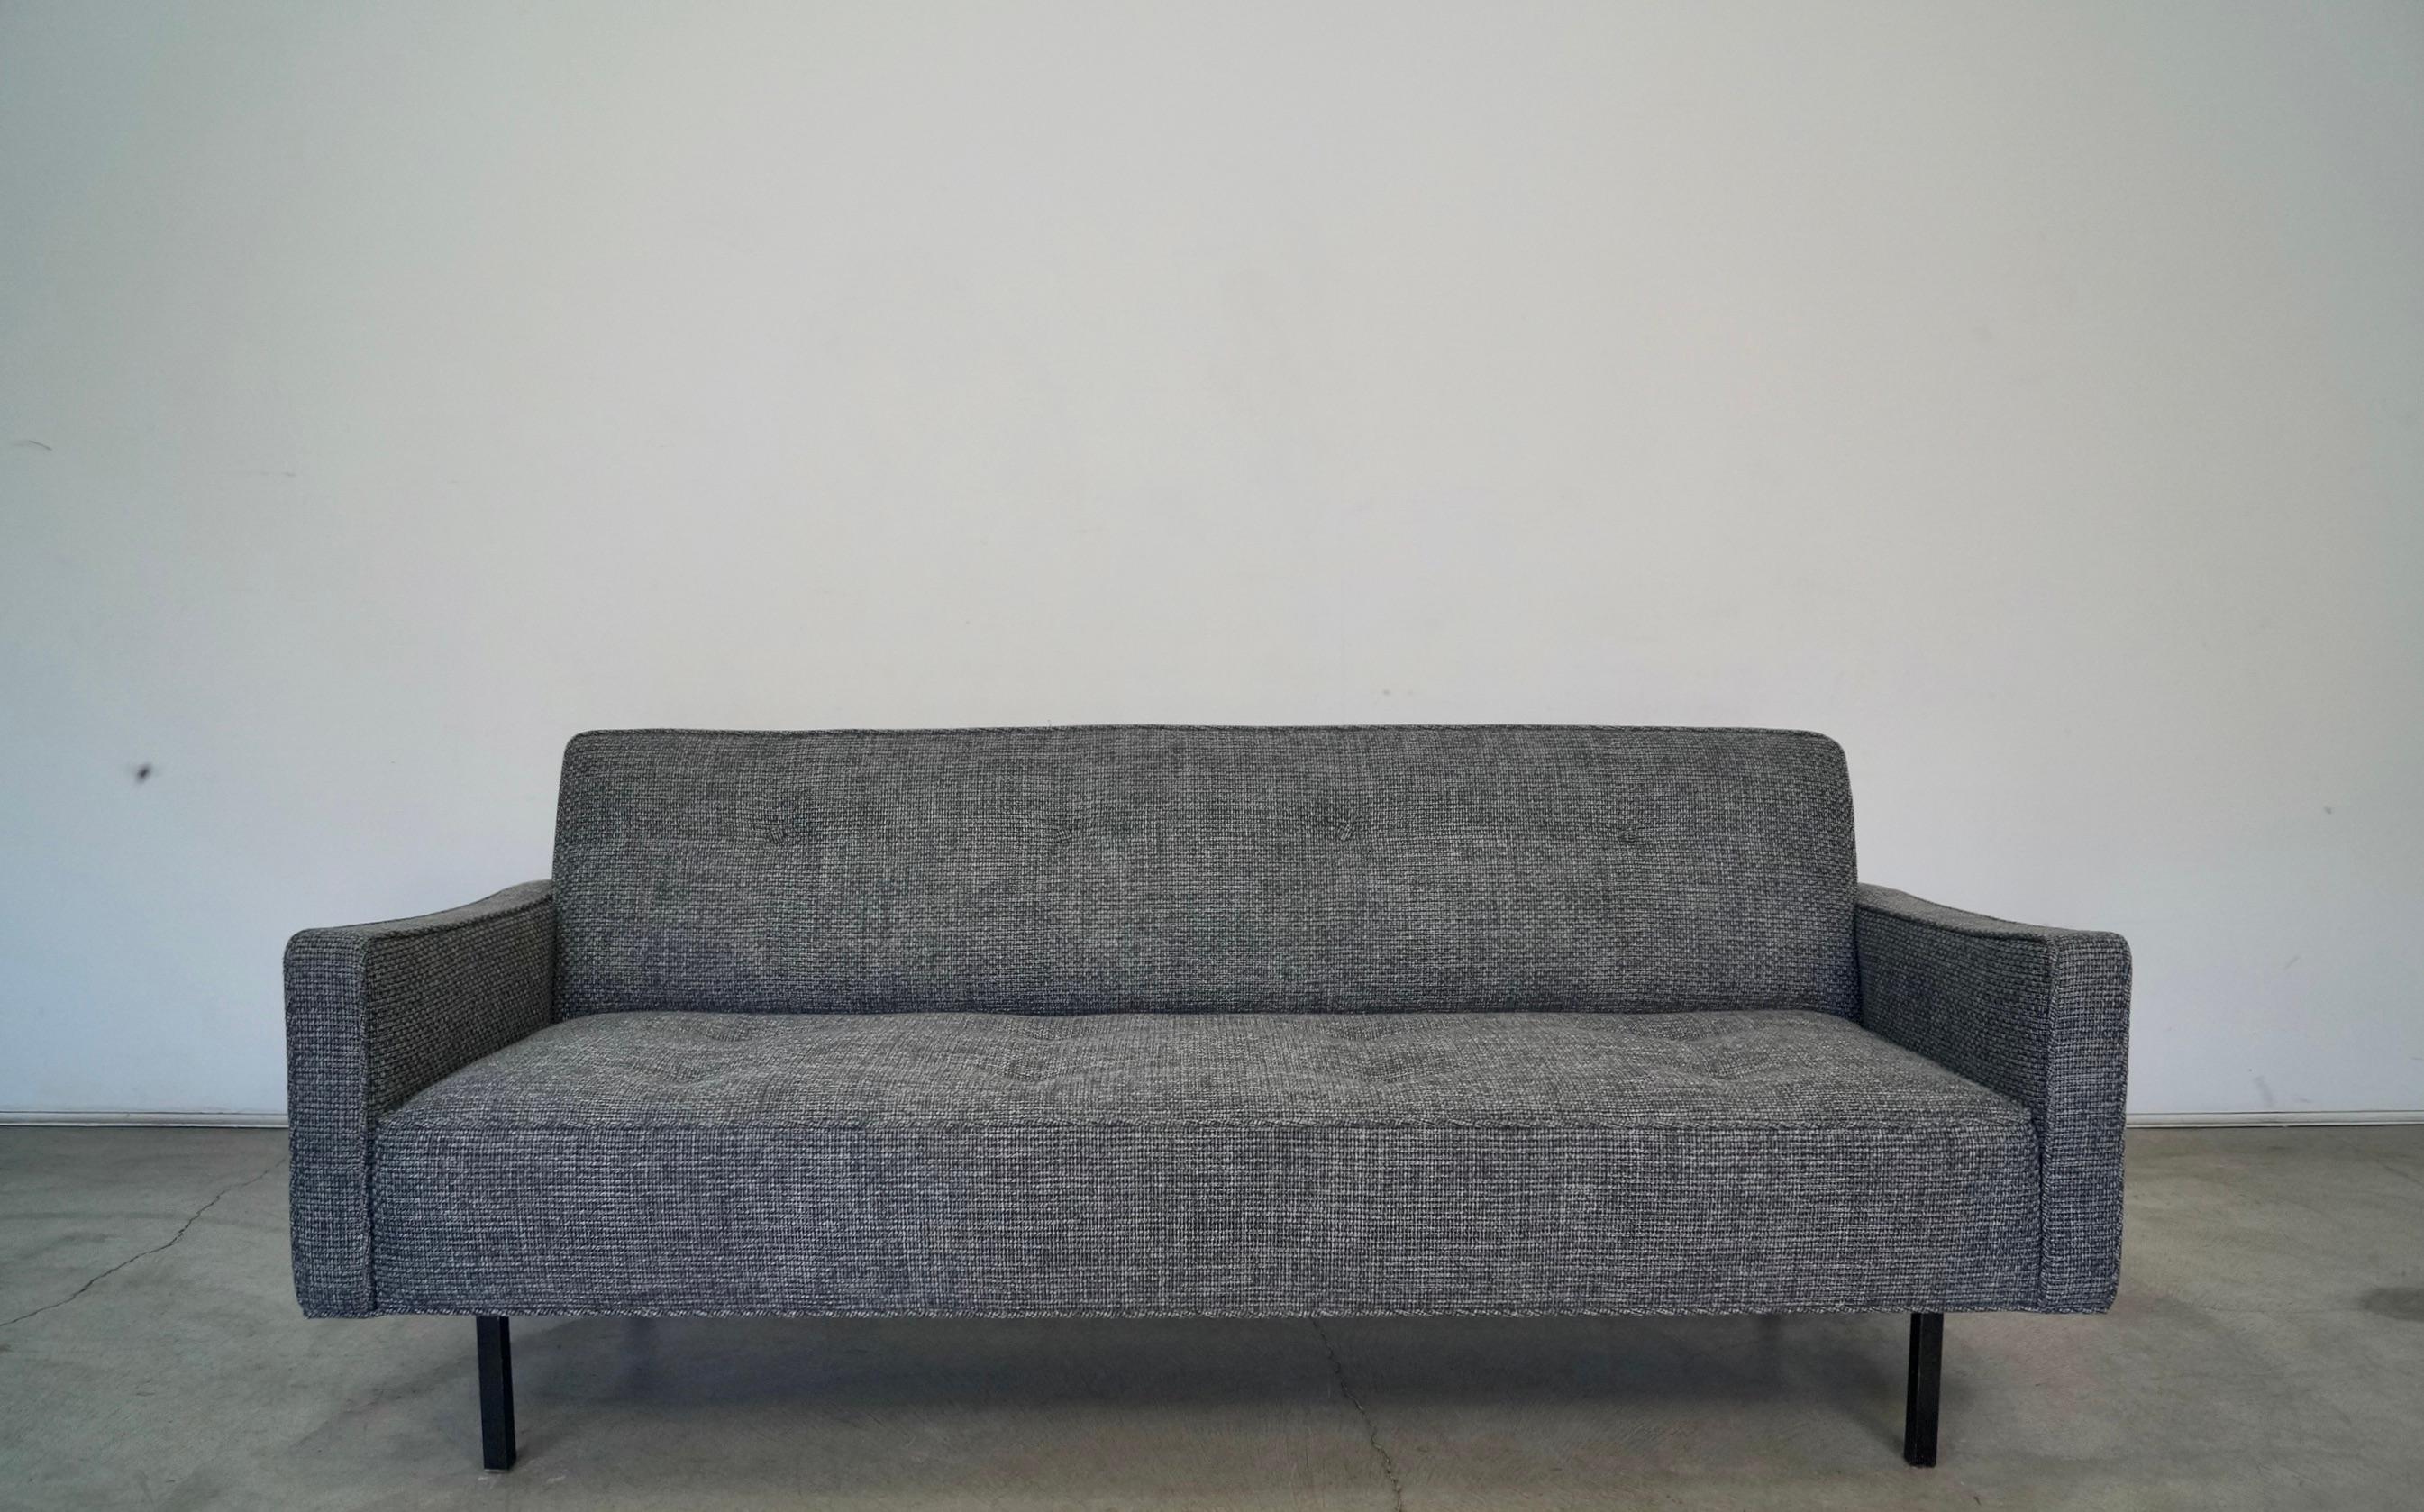 American 1960's Mid-Century Modern George Nelson Style Sofa For Sale